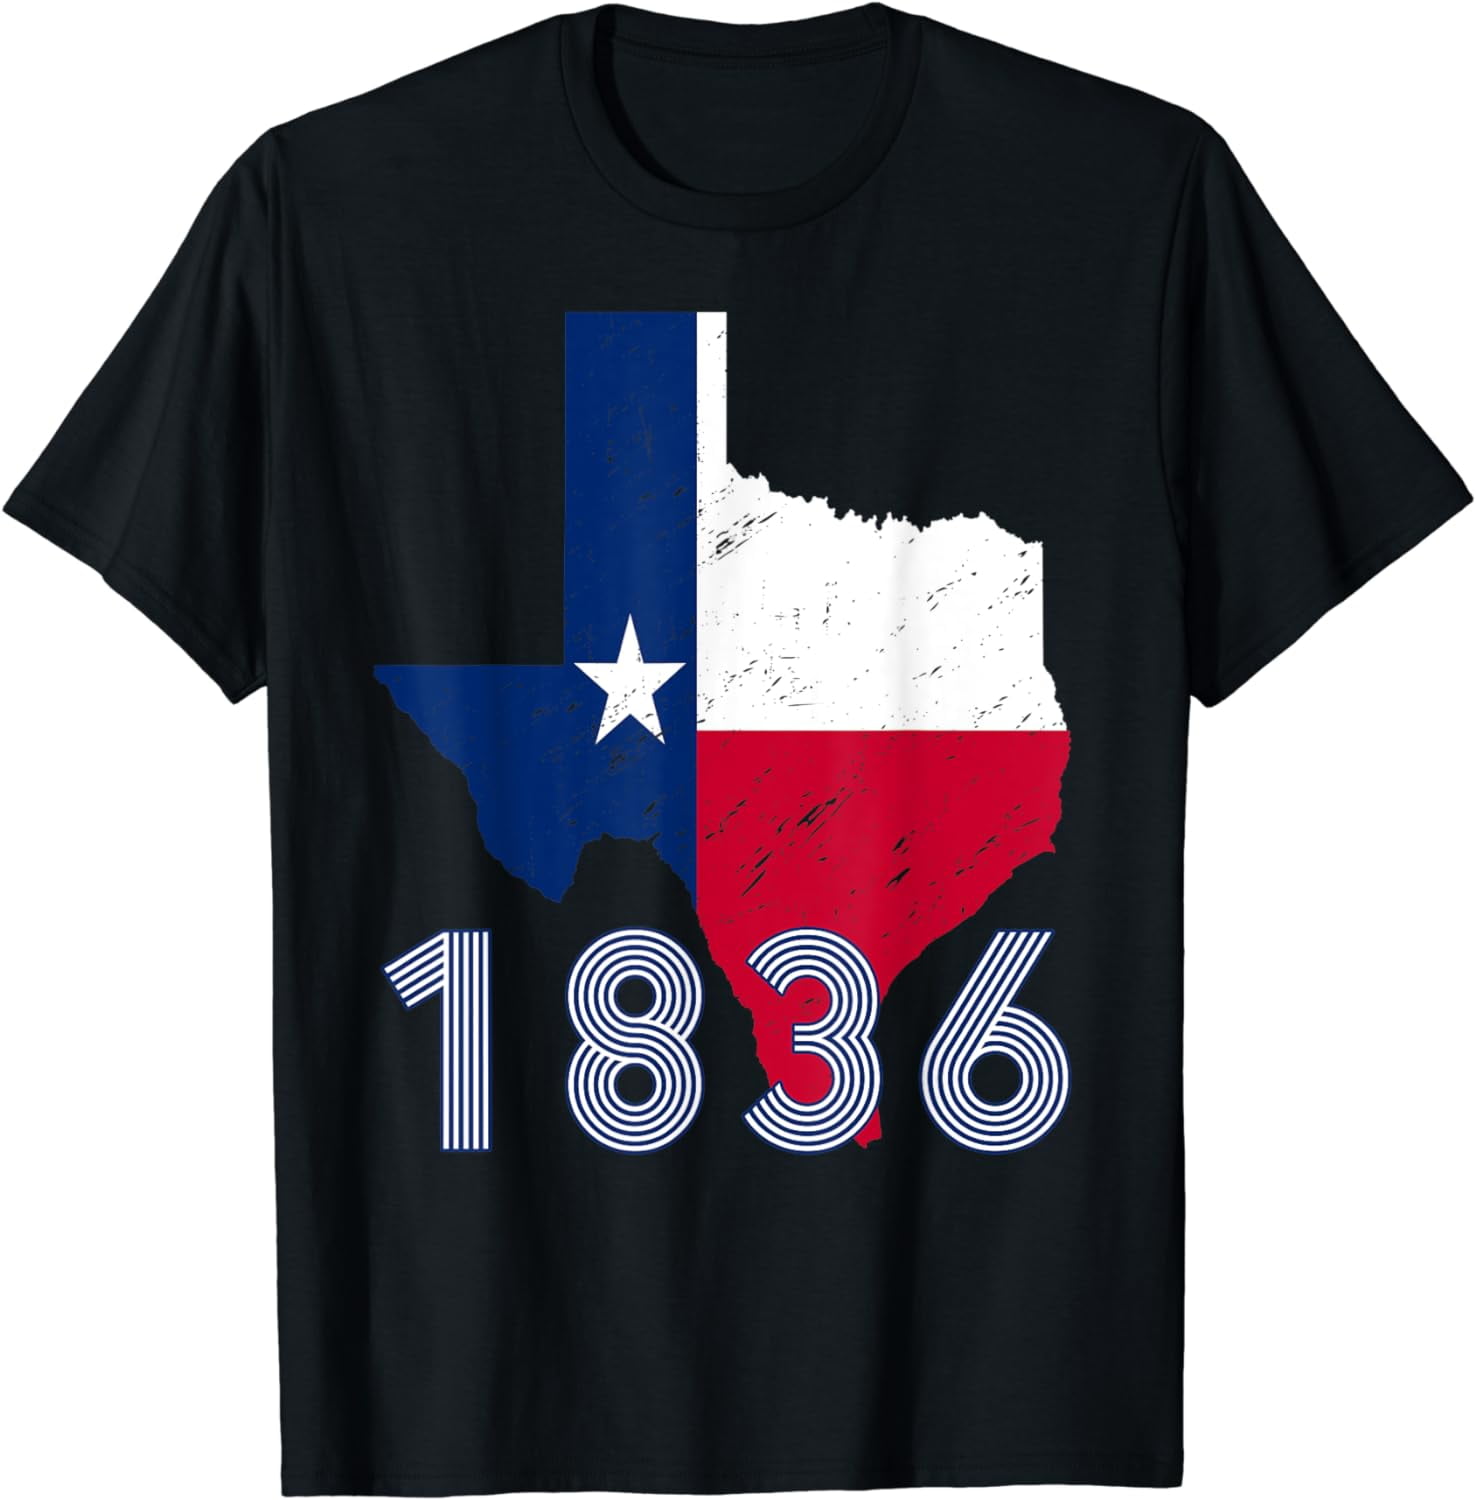 Texas State Independent Day Flag 1836 Vintage Tee T-Shirt - Walmart.com